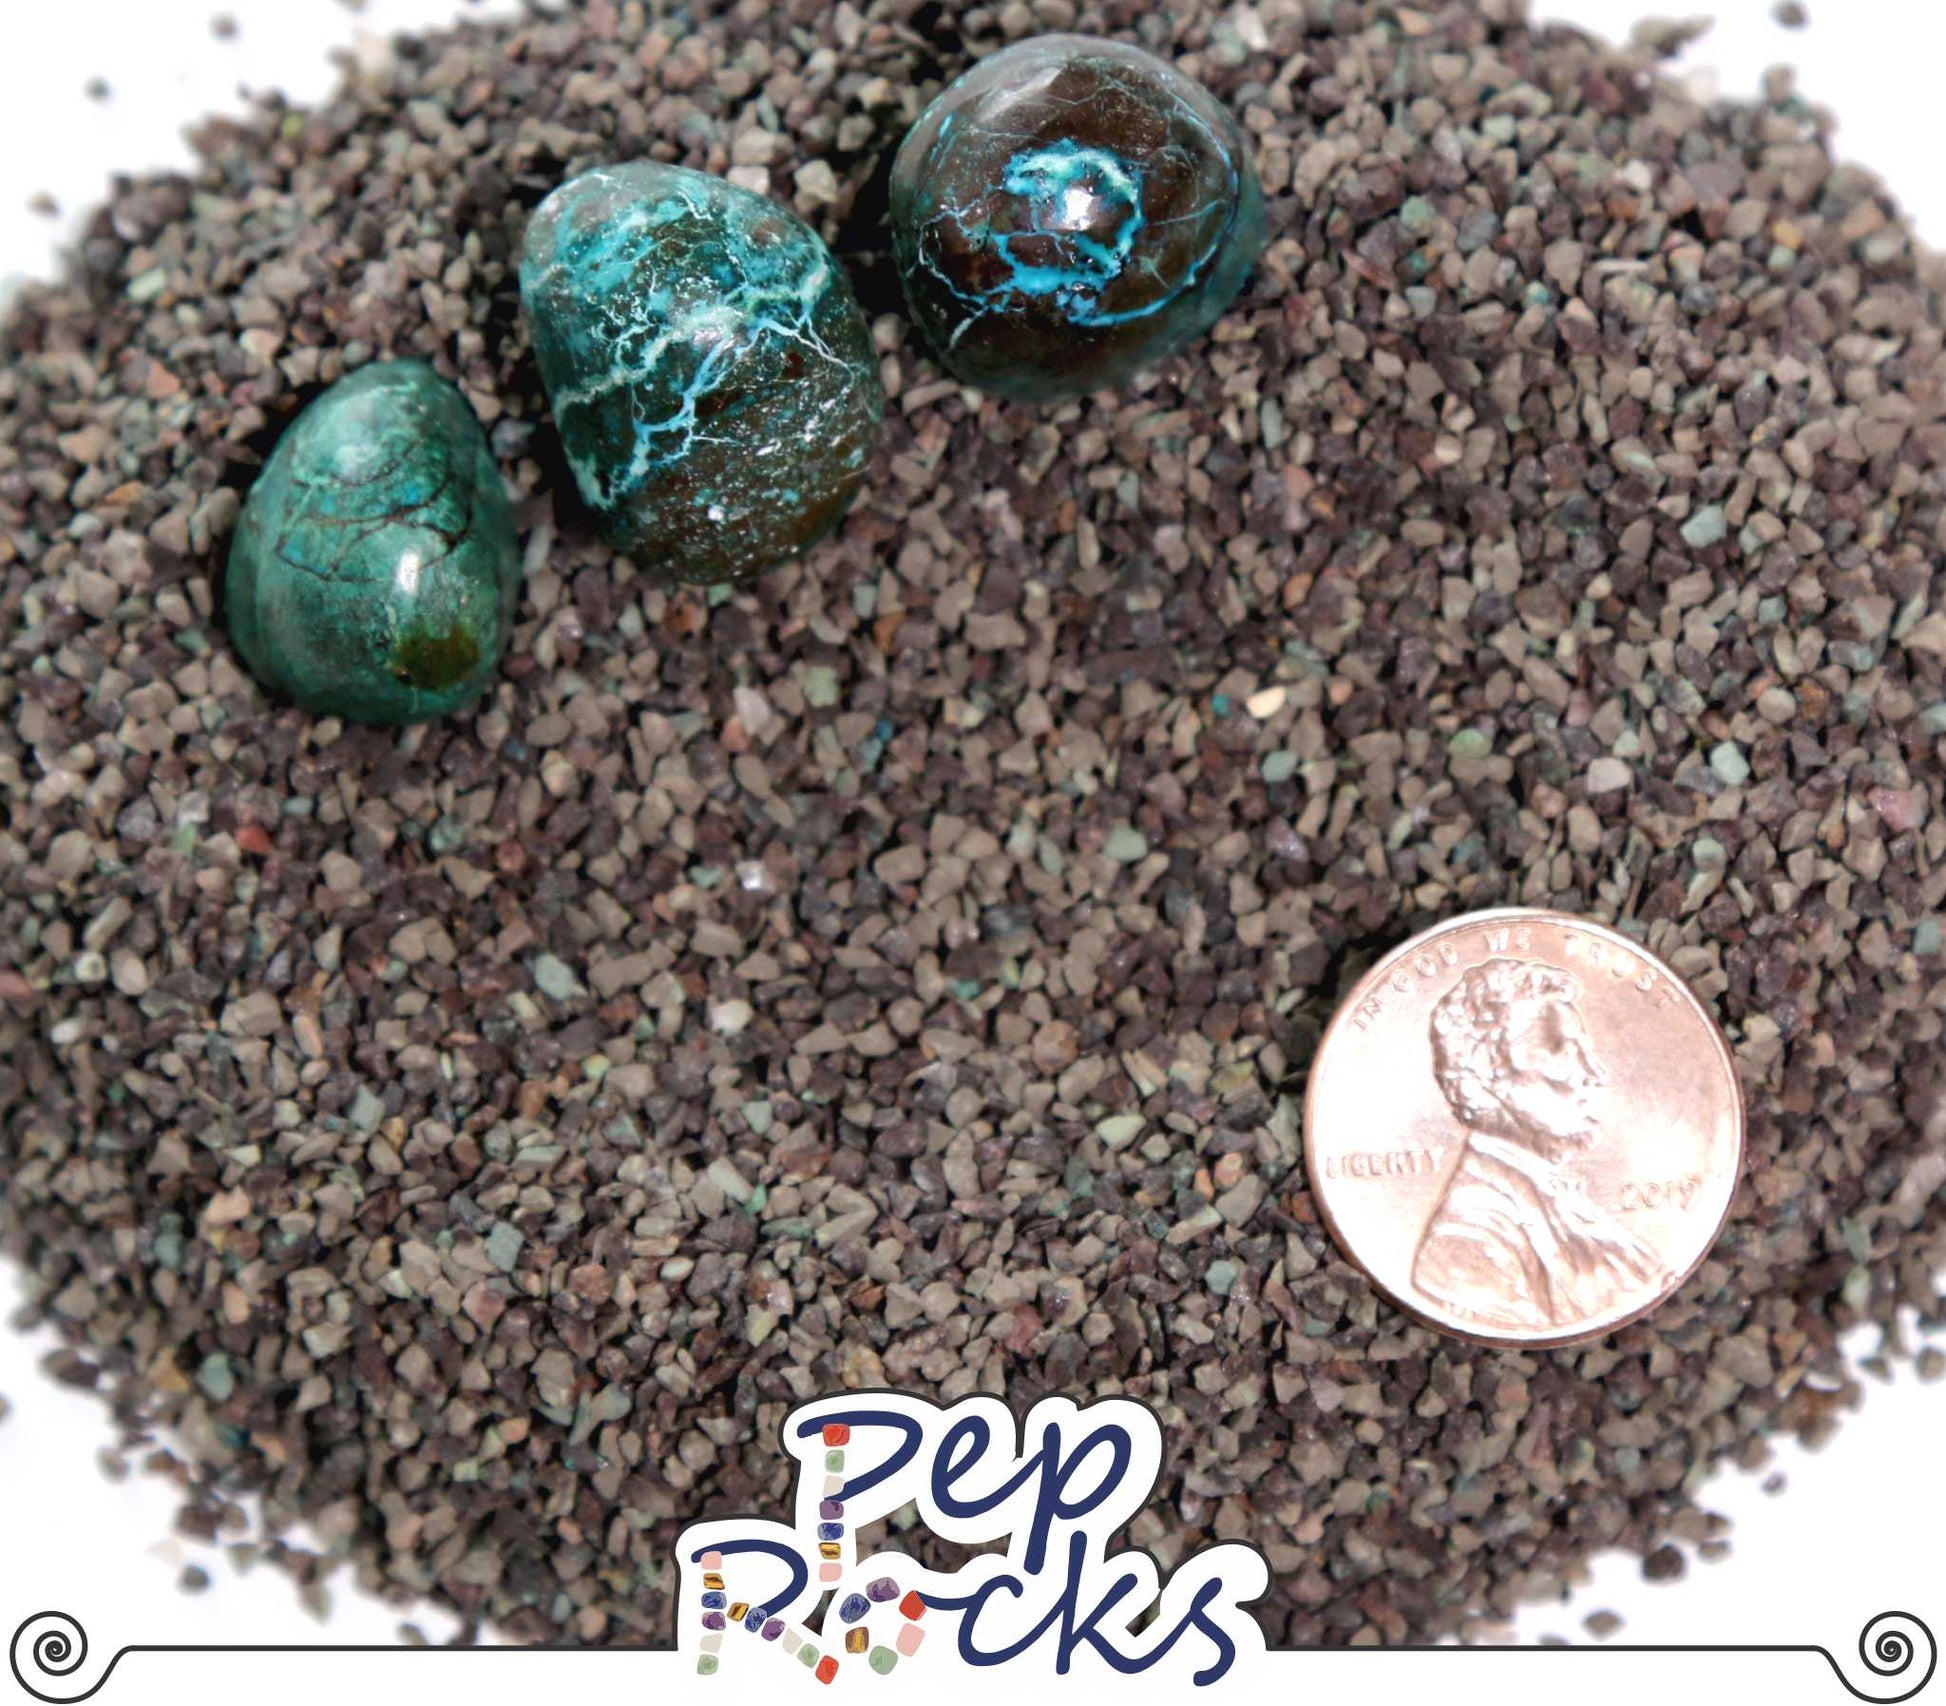 Chrysocolla - Coarse mineral sand particles